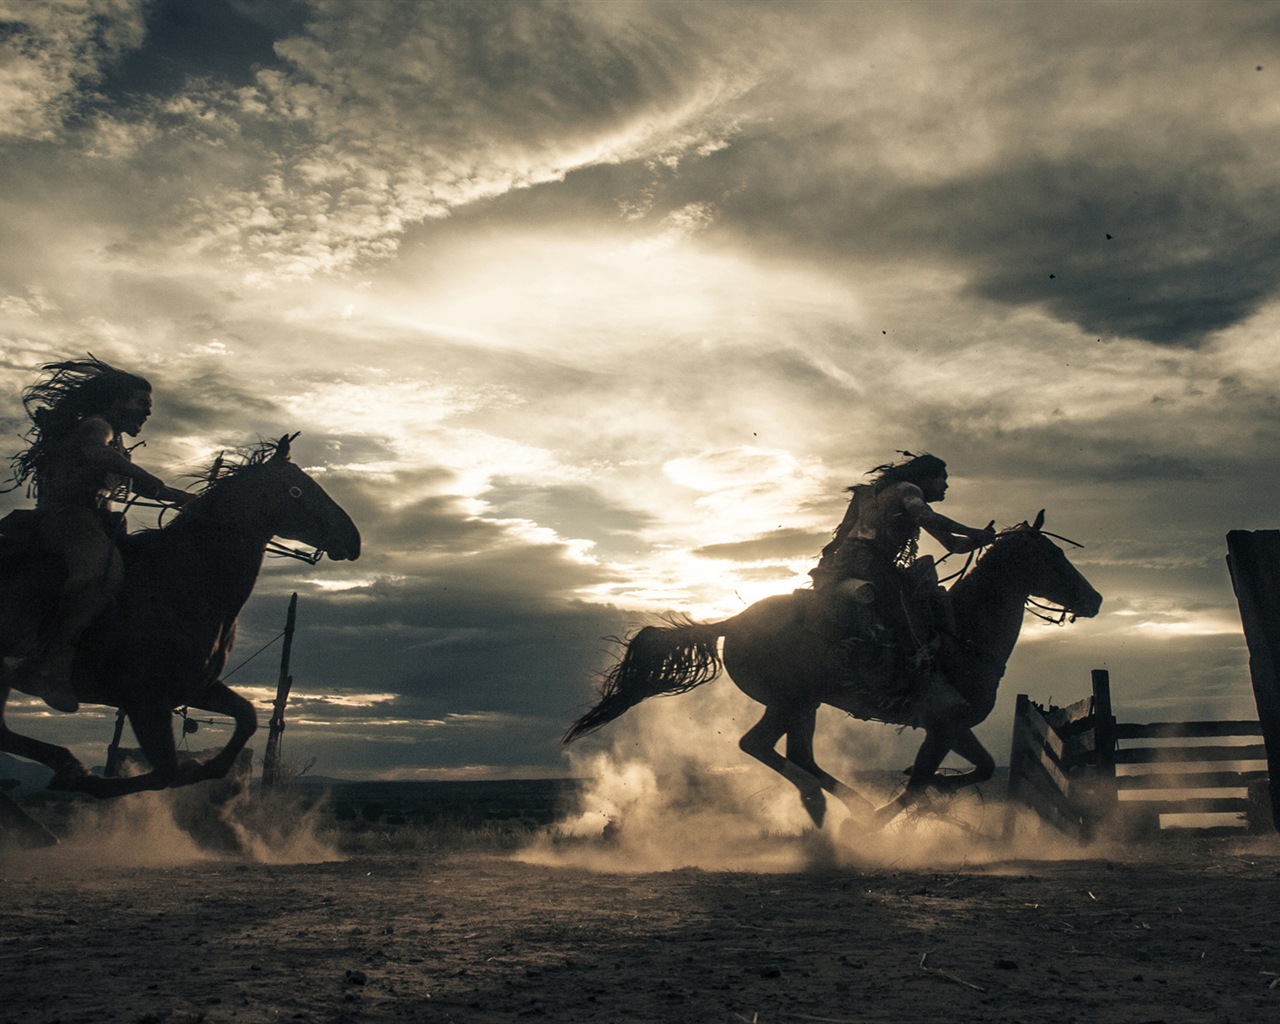 The Lone Ranger HD movie wallpapers #3 - 1280x1024